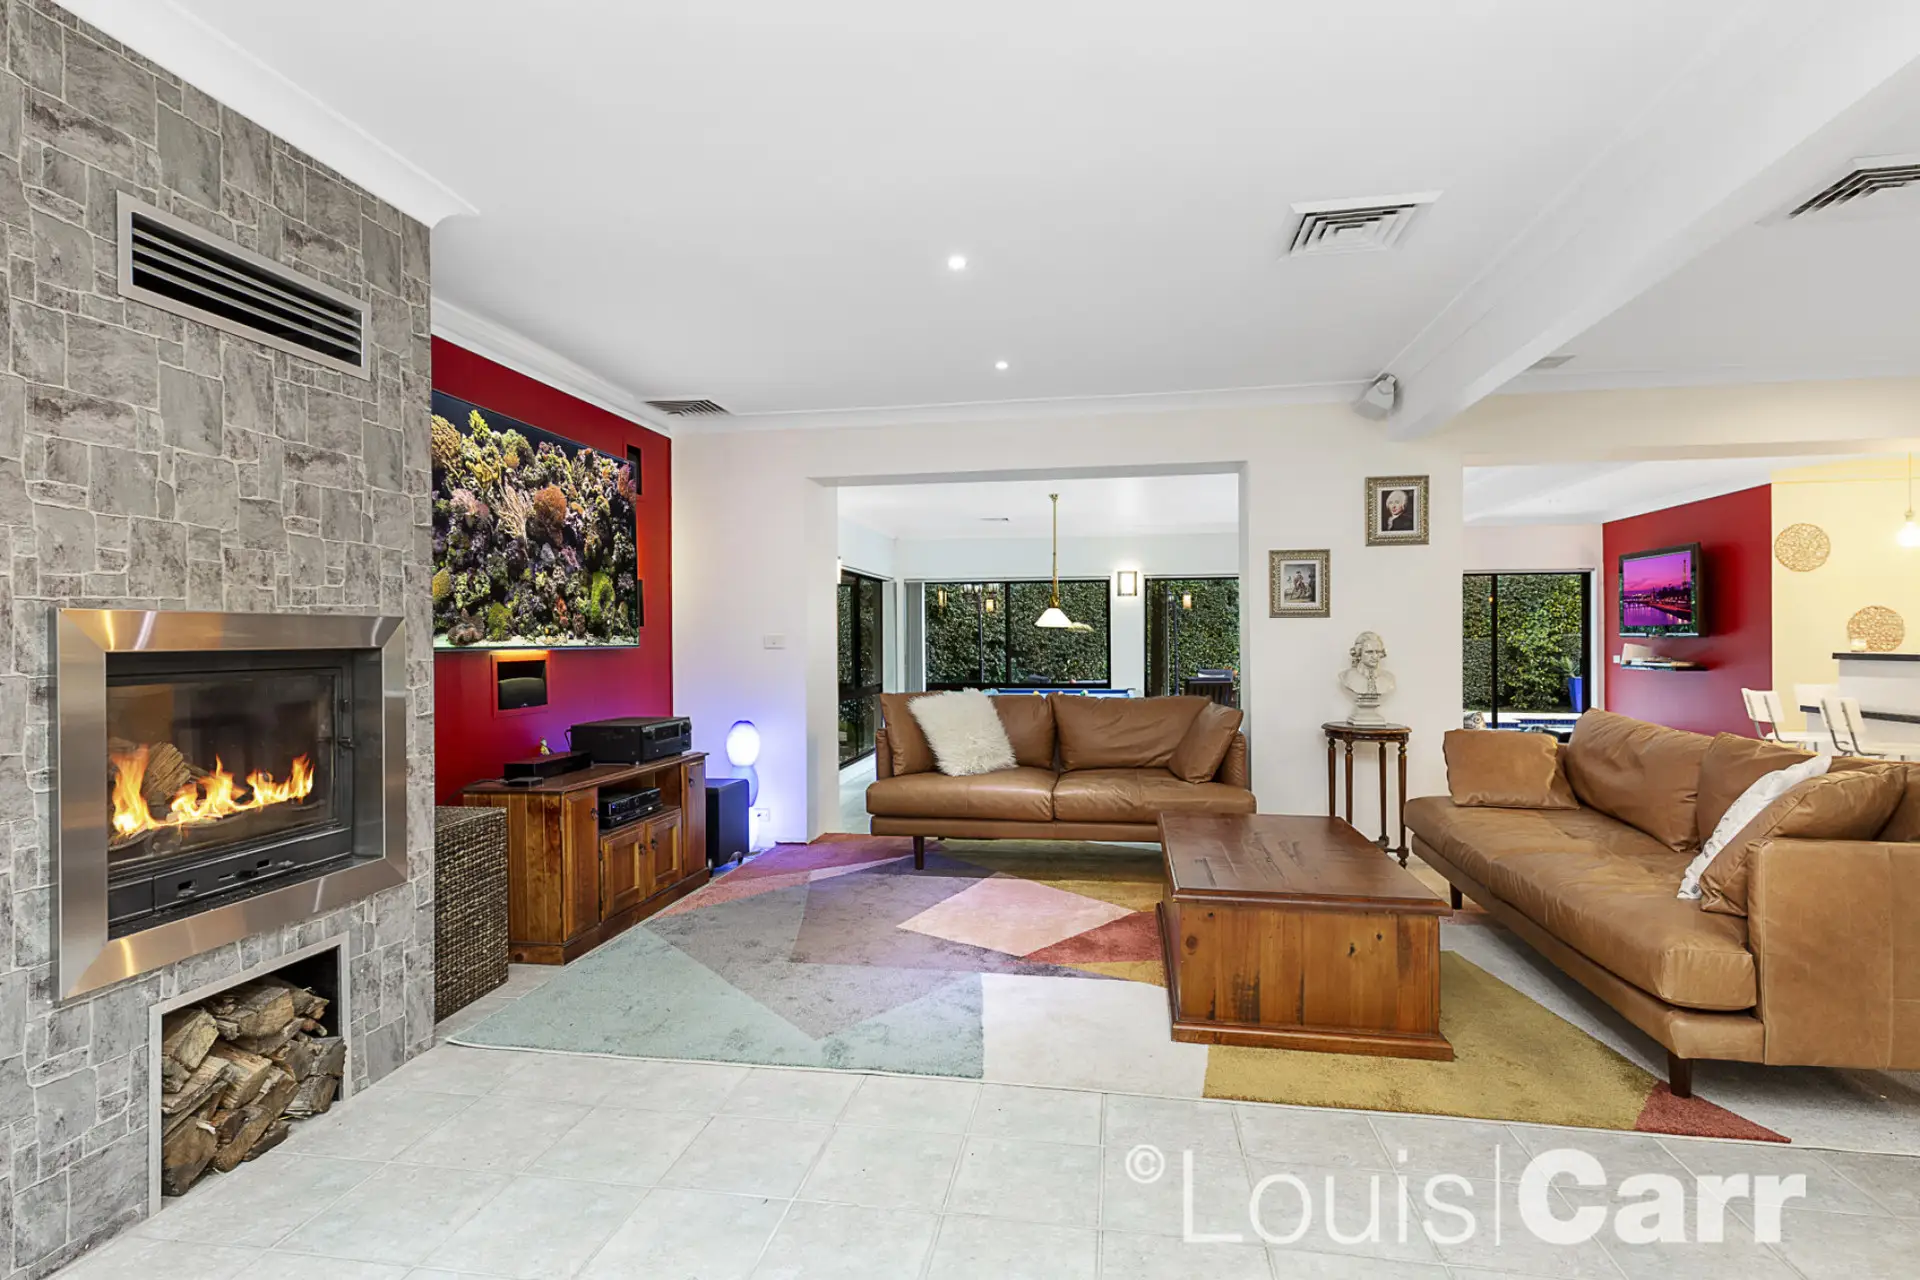 Photo #3: 45 Linksley Avenue, Glenhaven - Sold by Louis Carr Real Estate